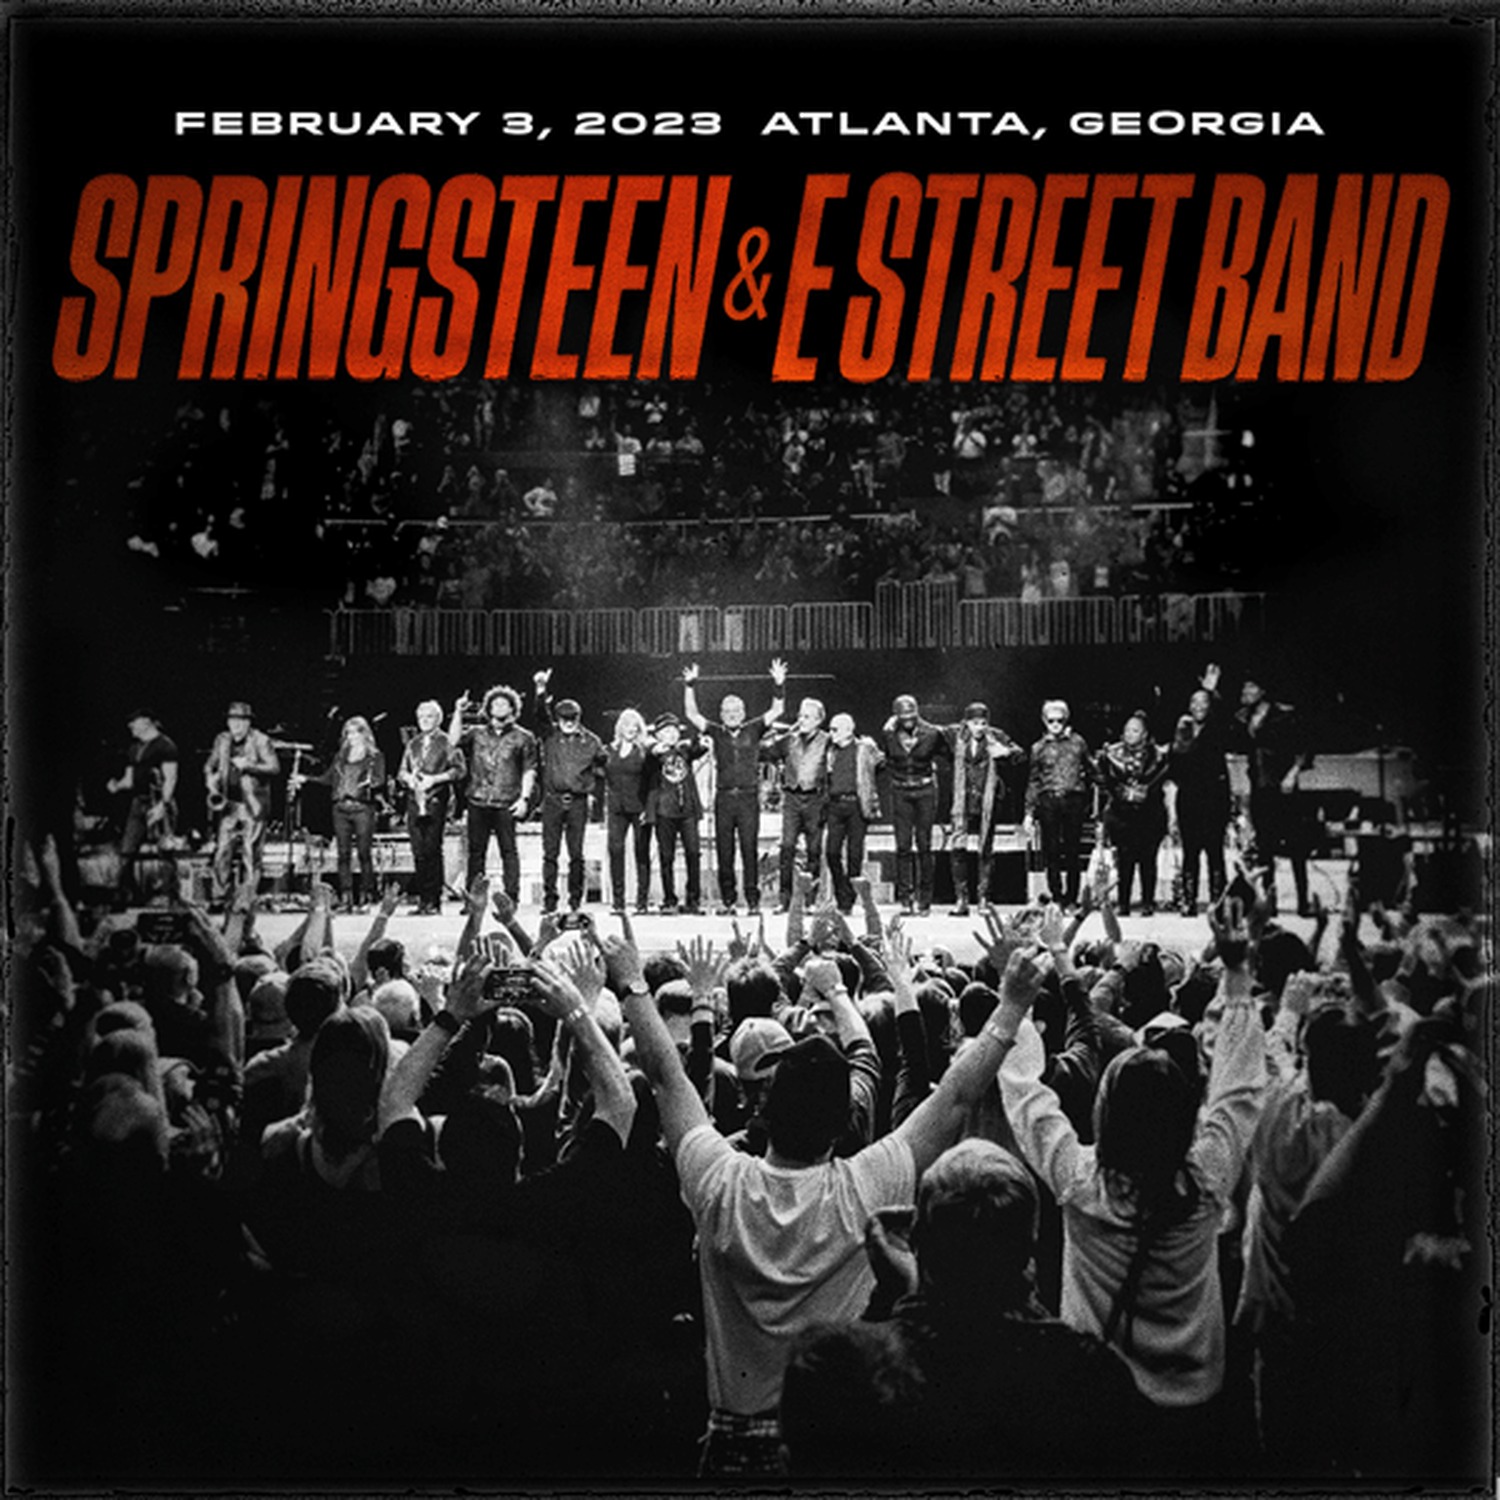 Bruce Springsteen And The E Street Band Kick Off The 2024 World Tour This Month.